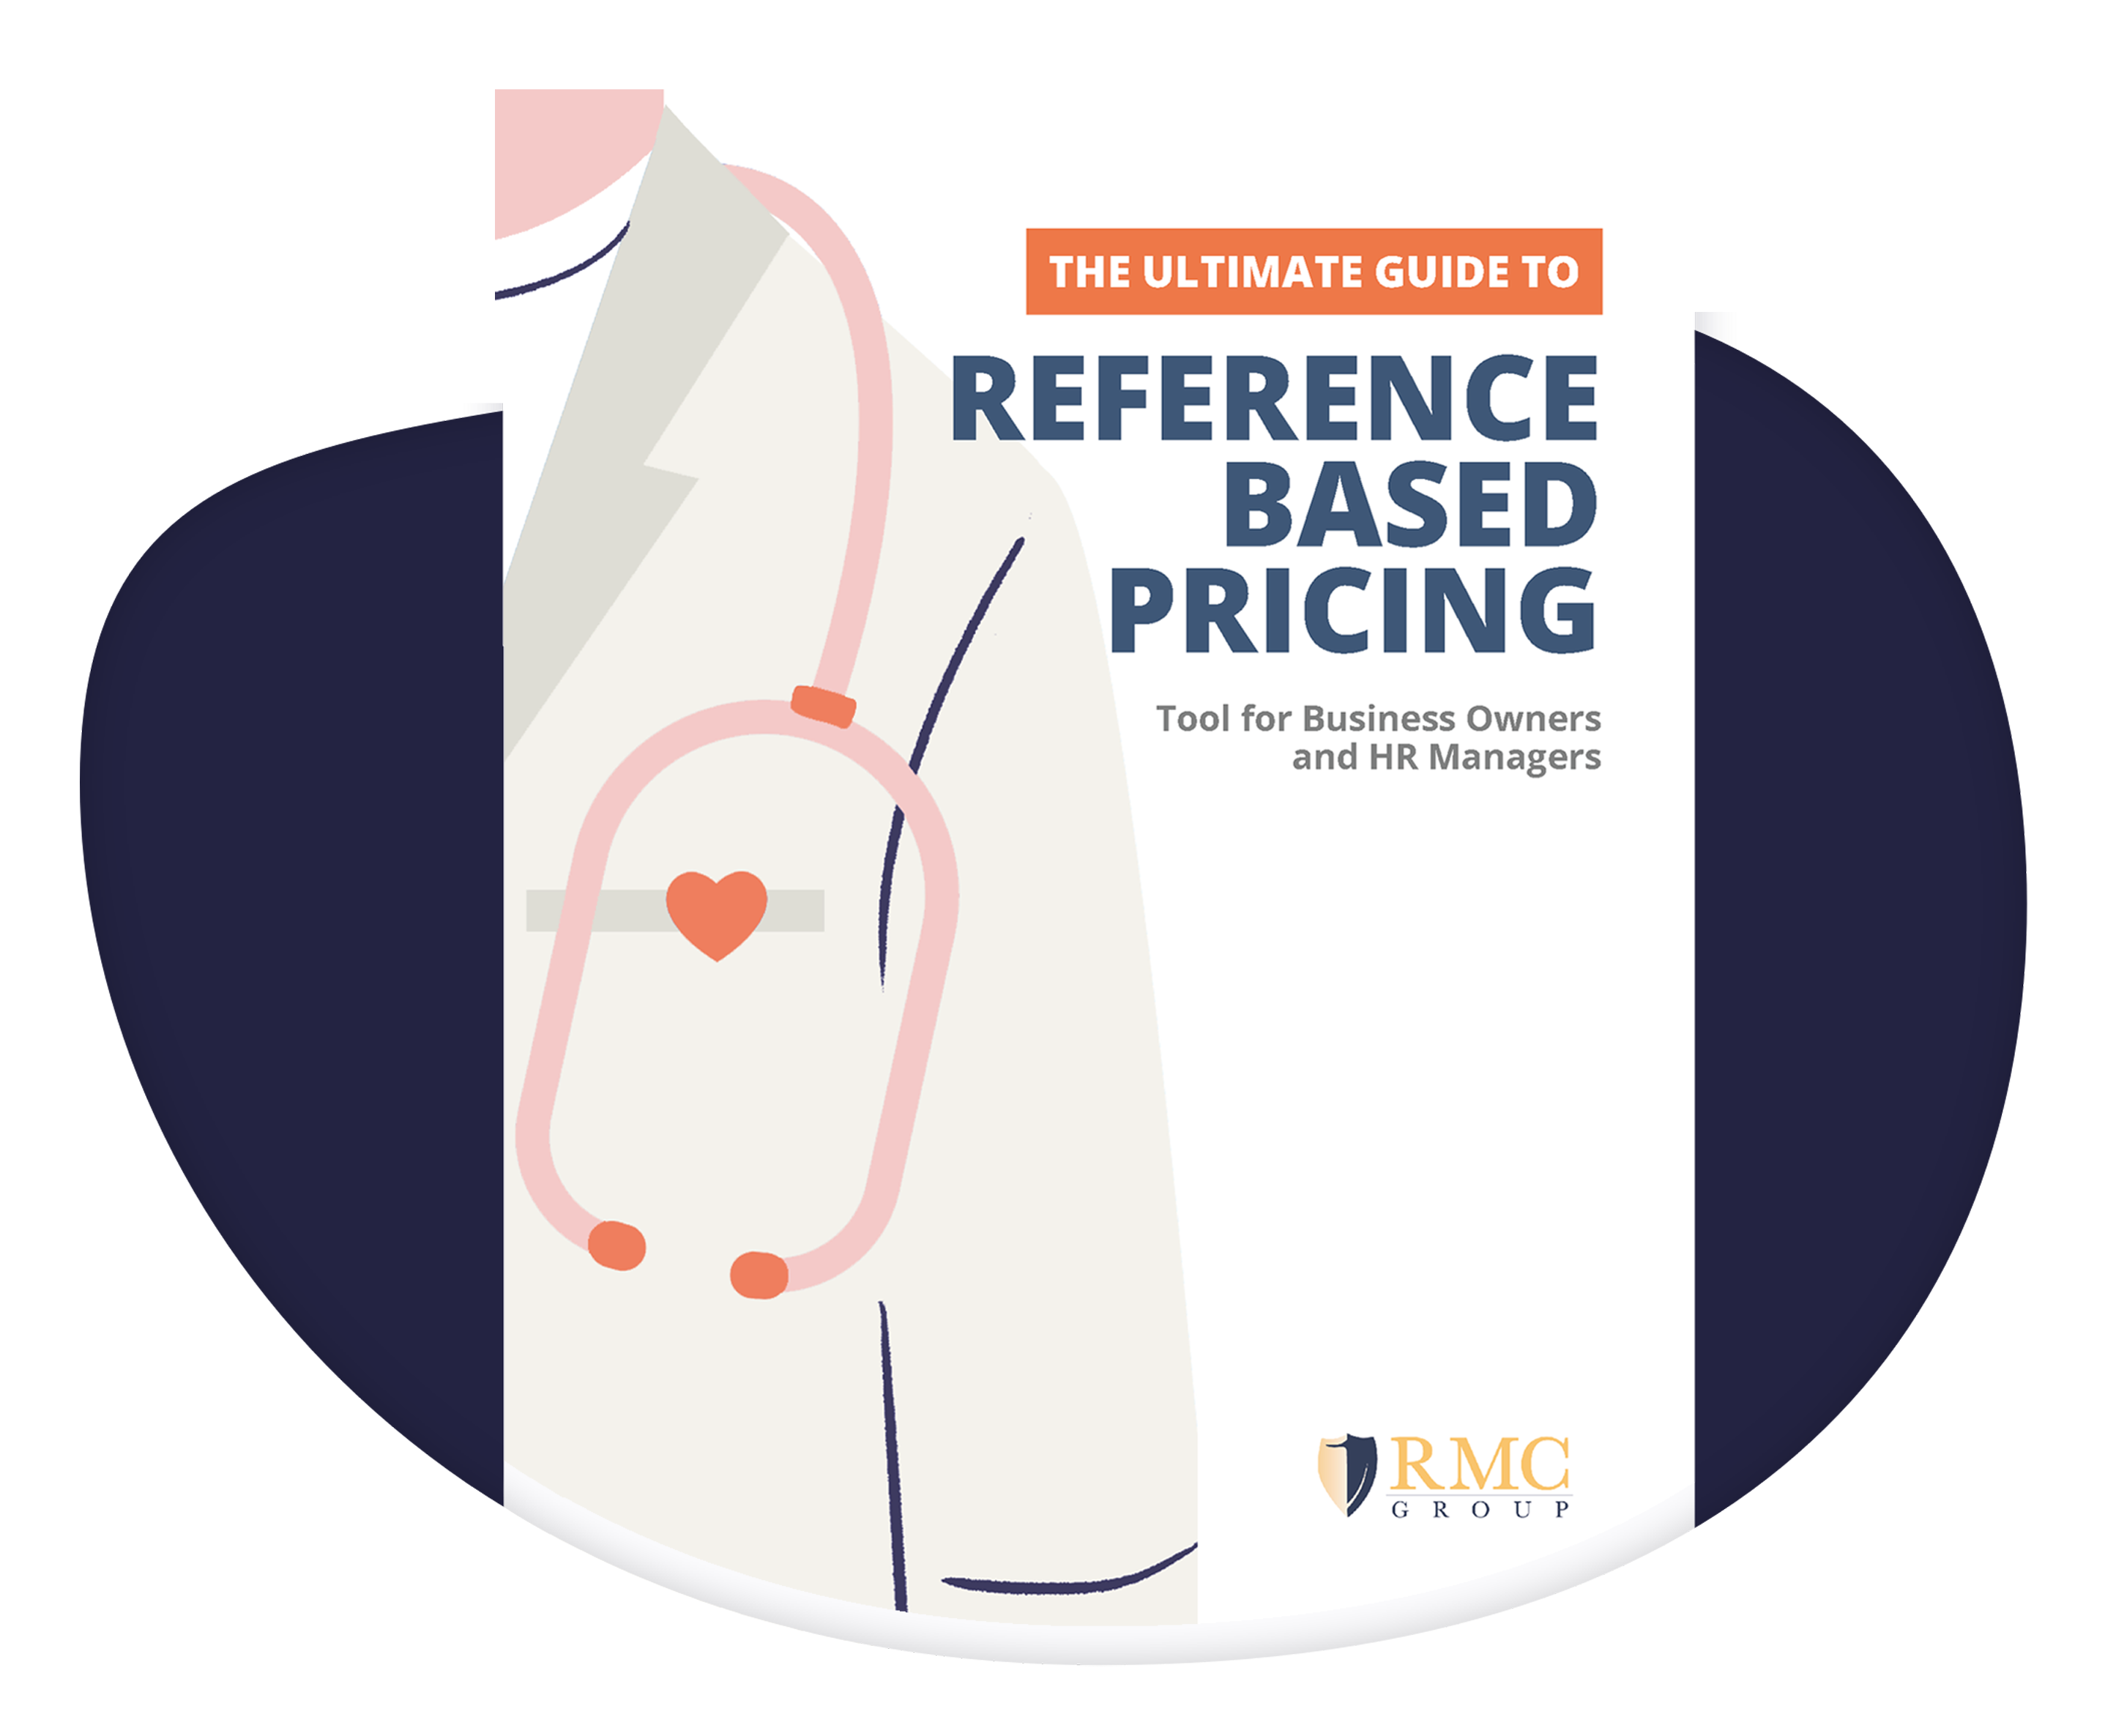 Image (FINAL) - The Ultimate Guide to Reference Based Pricing-1